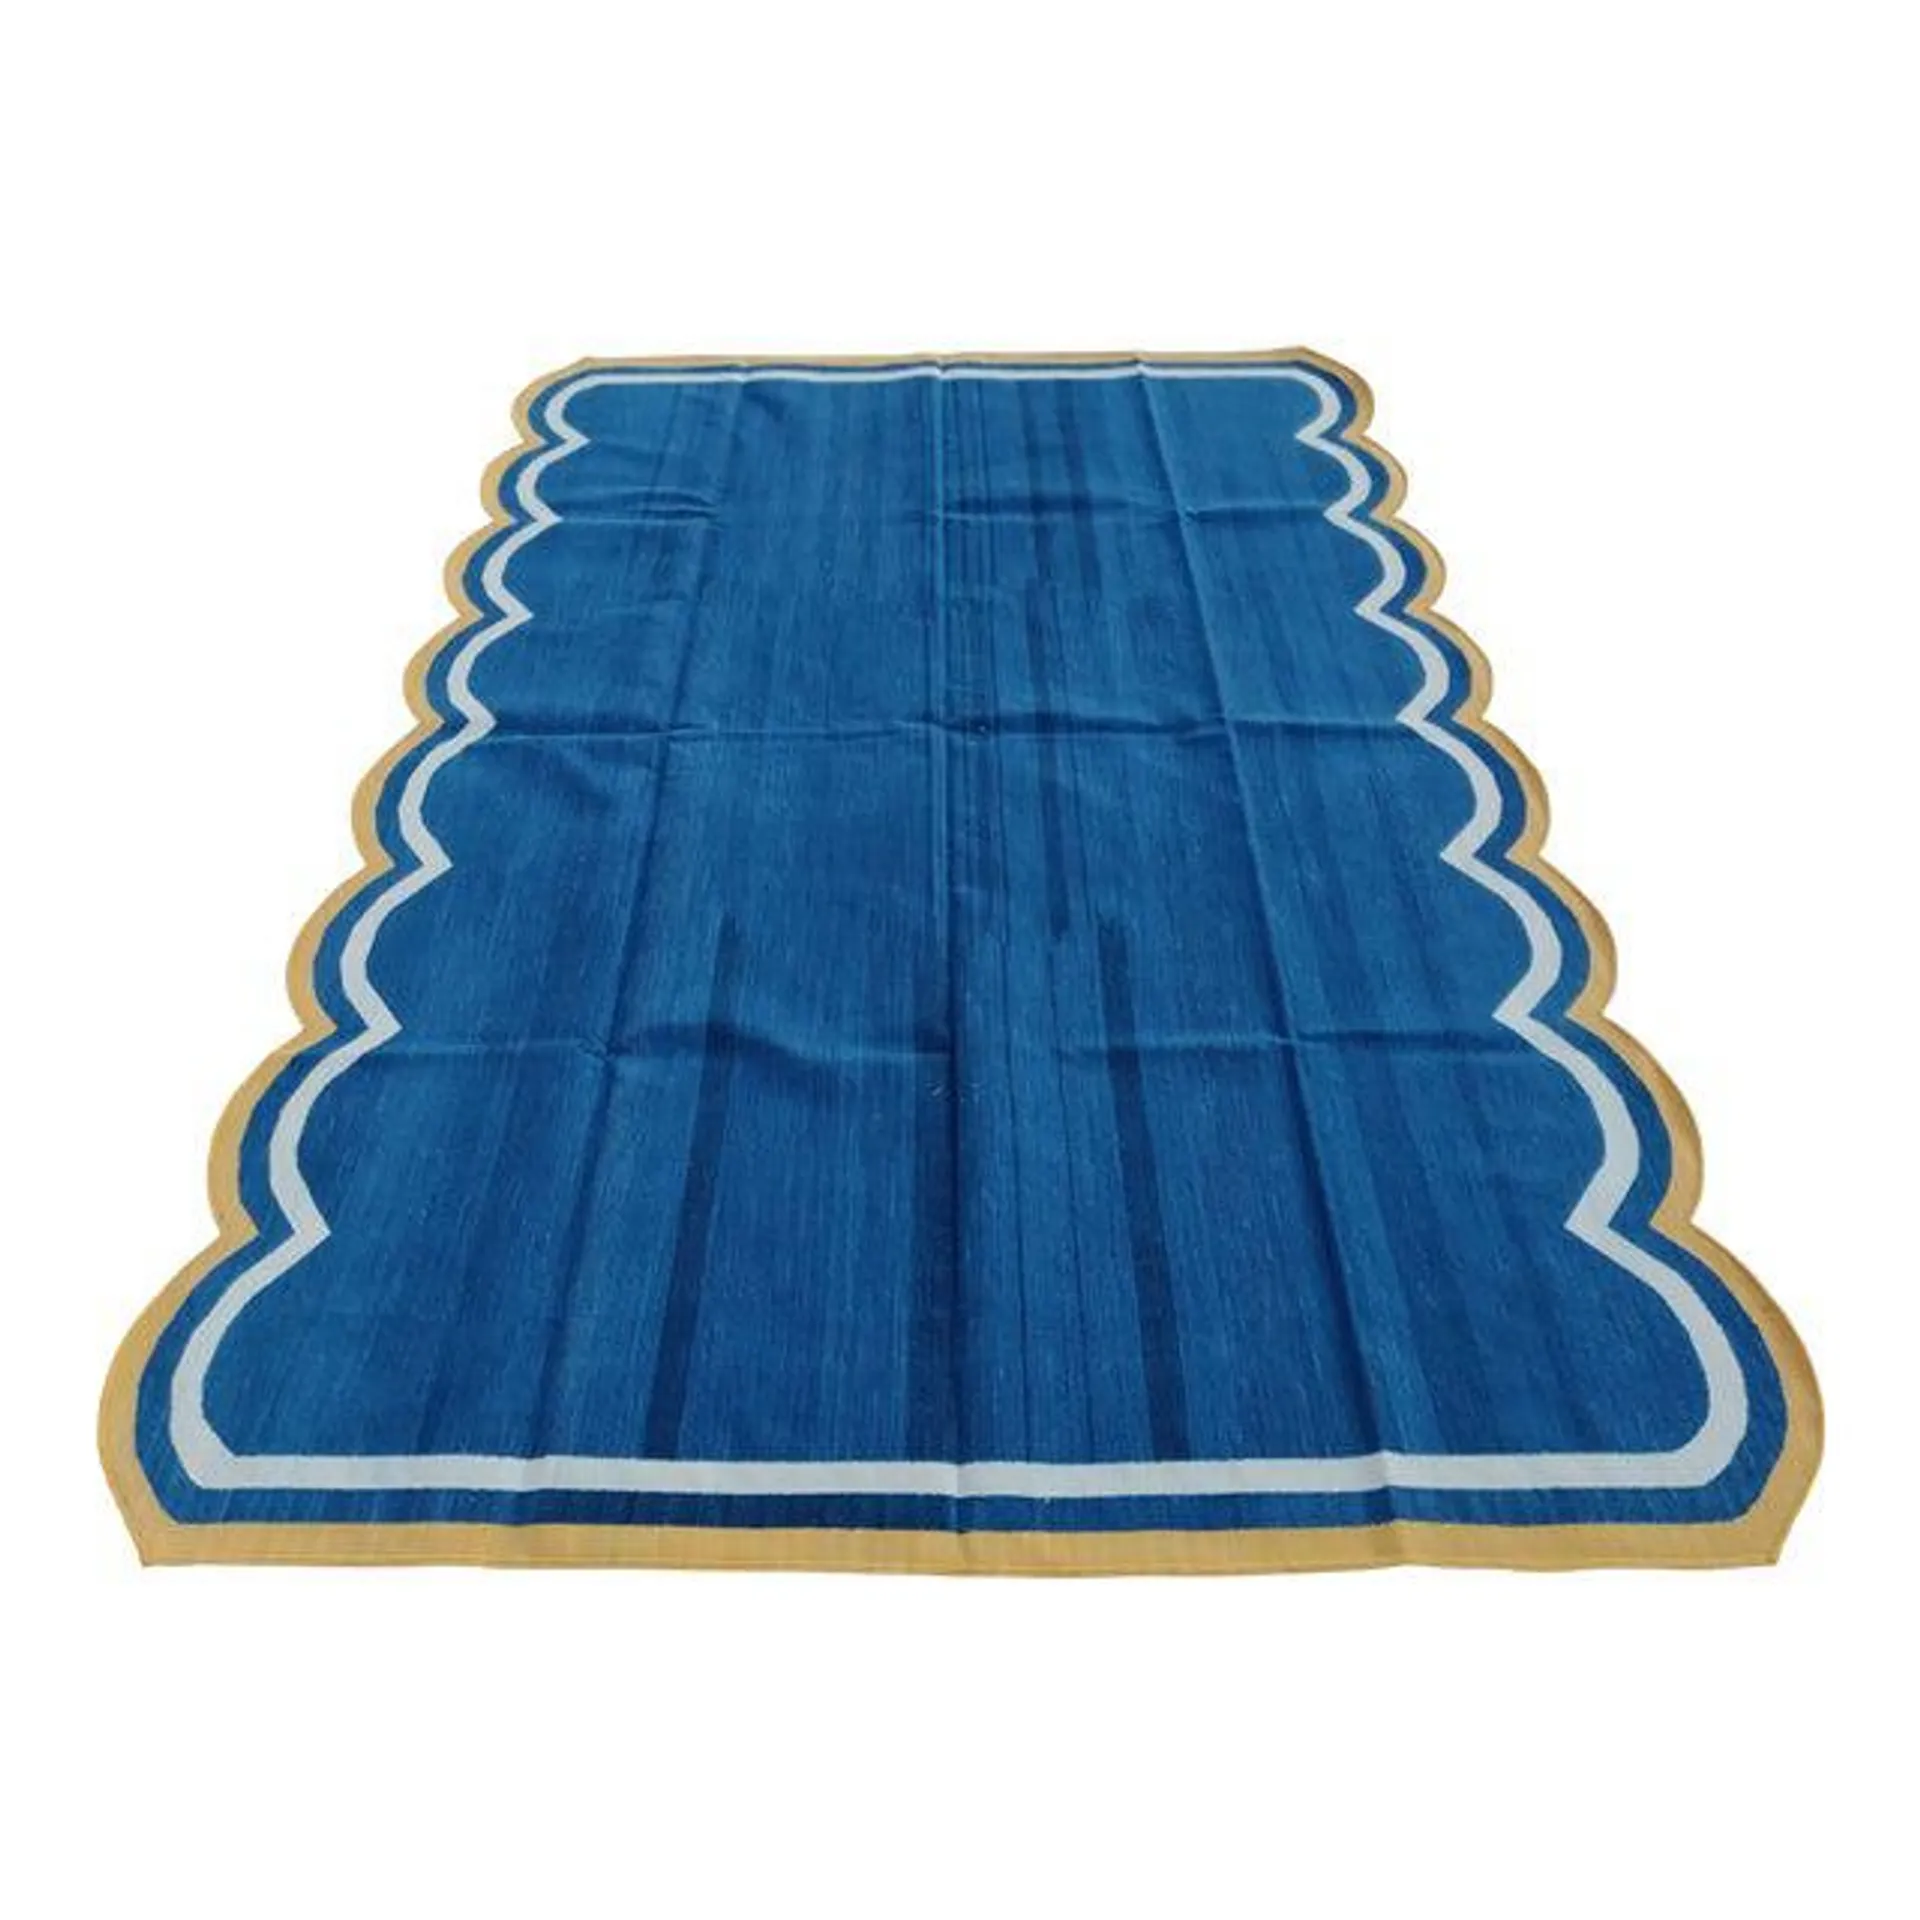 Handmade Cotton Vegetable Dyed Scalloped Edge Rug Royal Blue With Cream and Yellow Border - 6x9